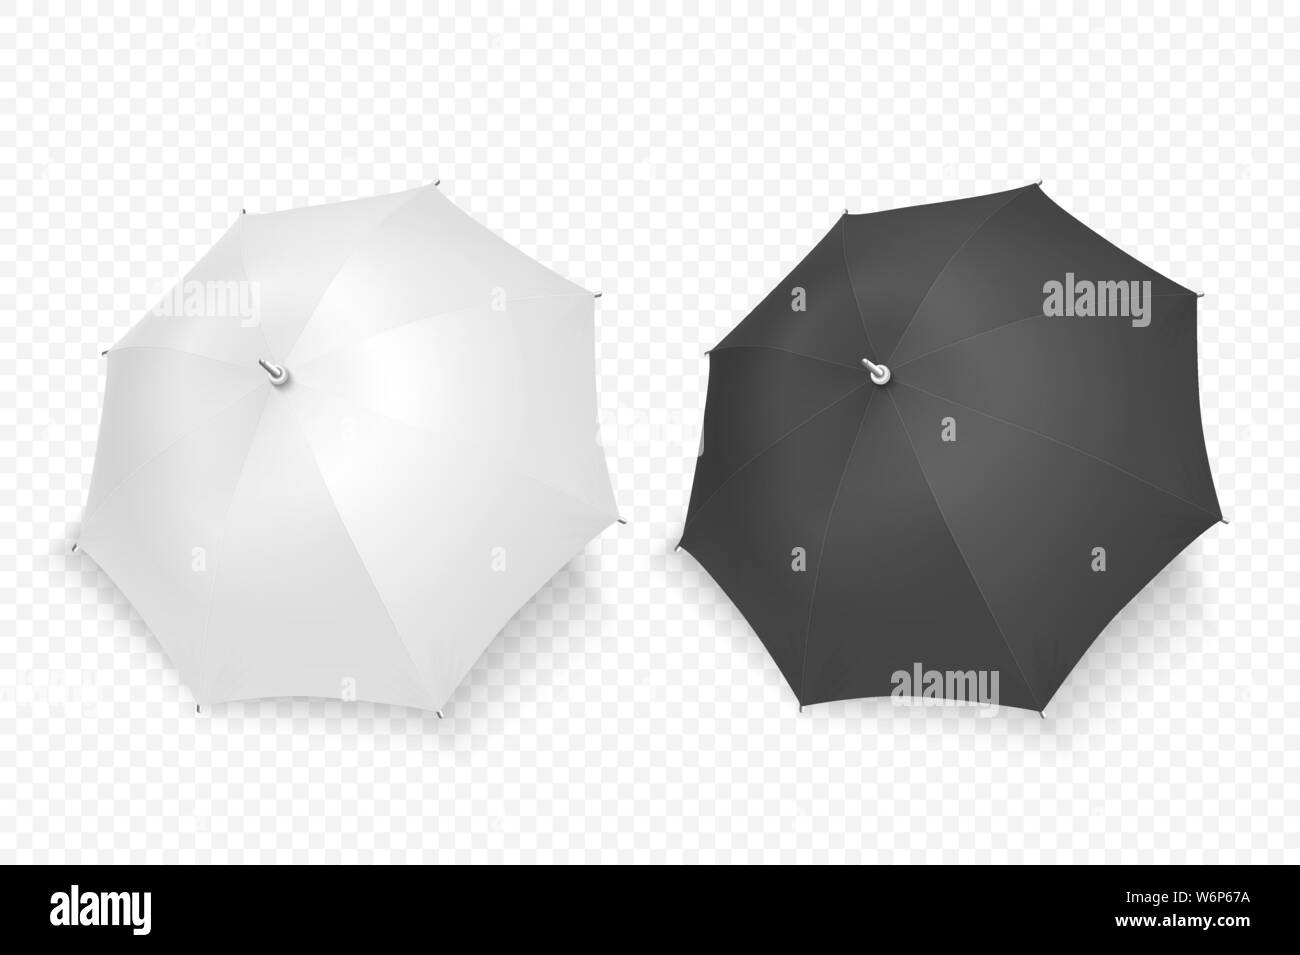 Vector 3d Realistic Render White and Black Blank Umbrella Icon Set Closeup Isolated on Transparent Background. Design Template of Opened Parasols for Stock Vector